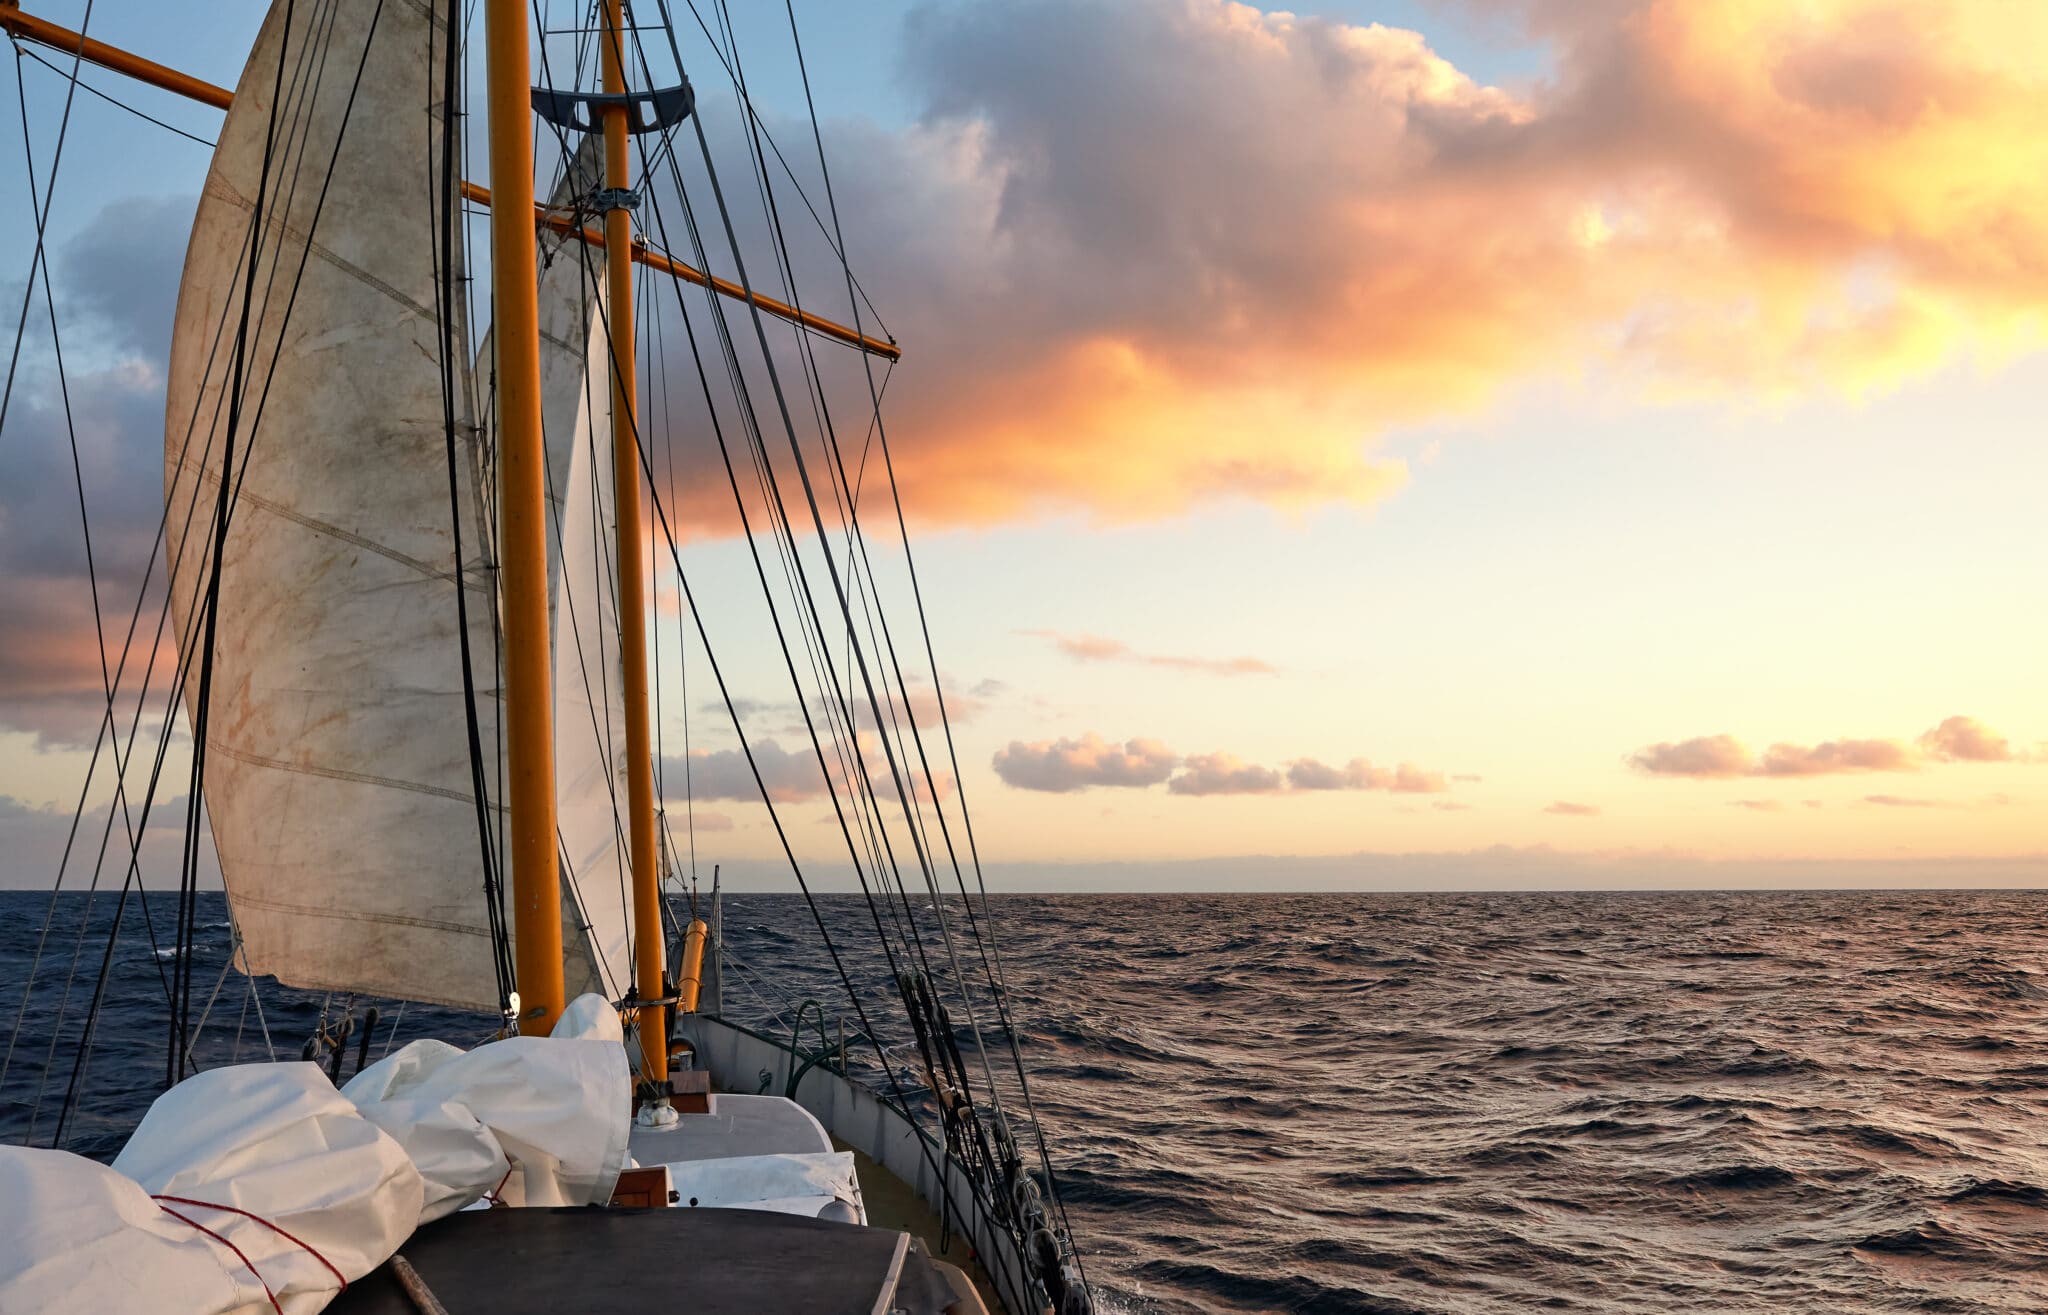 Sailing old schooner at sunset, travel and adventure concept.